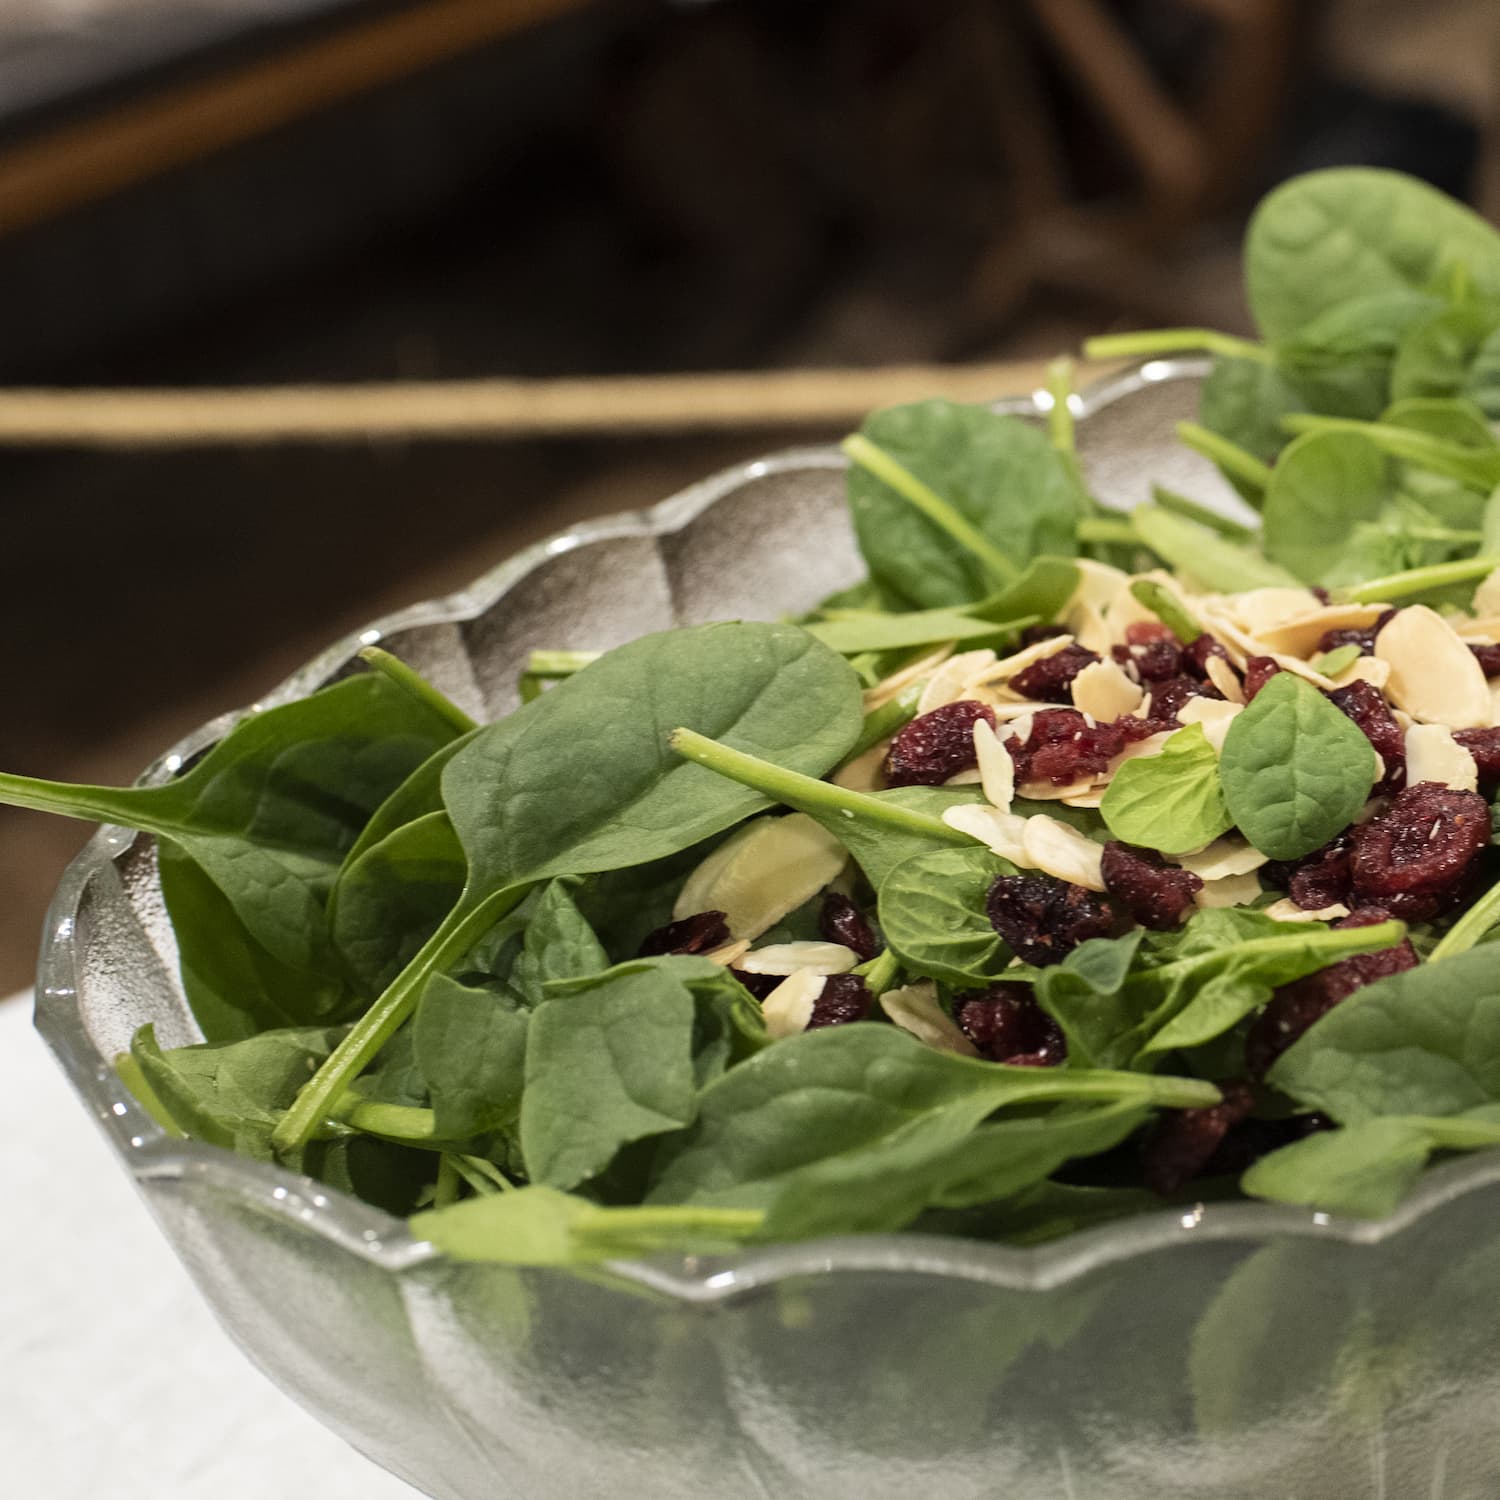 Spinacj,salad with cranberries and almond slivers